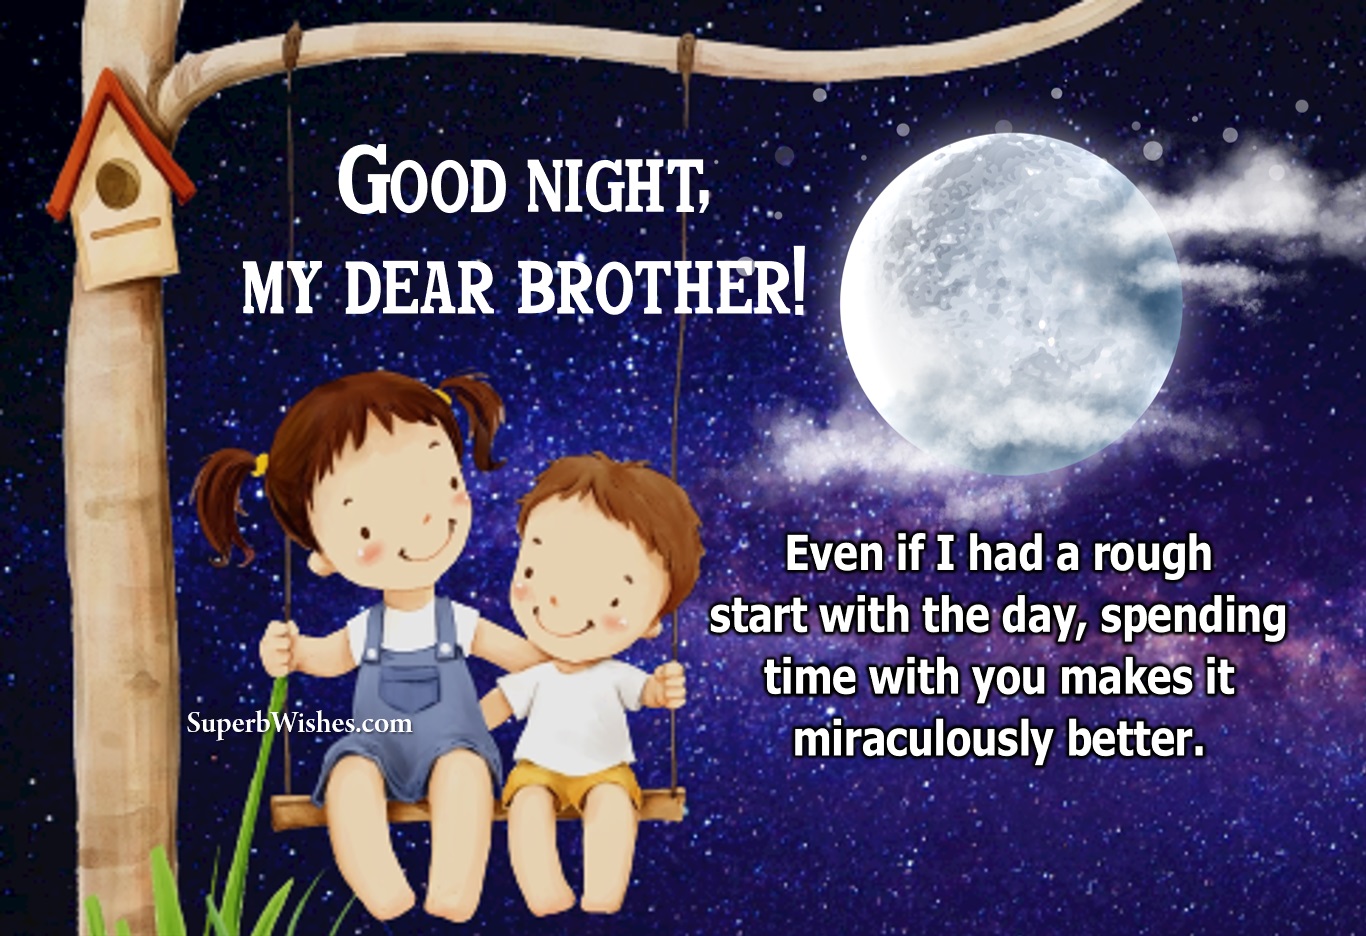 Good Night Message For Brother Image | SuperbWishes.com